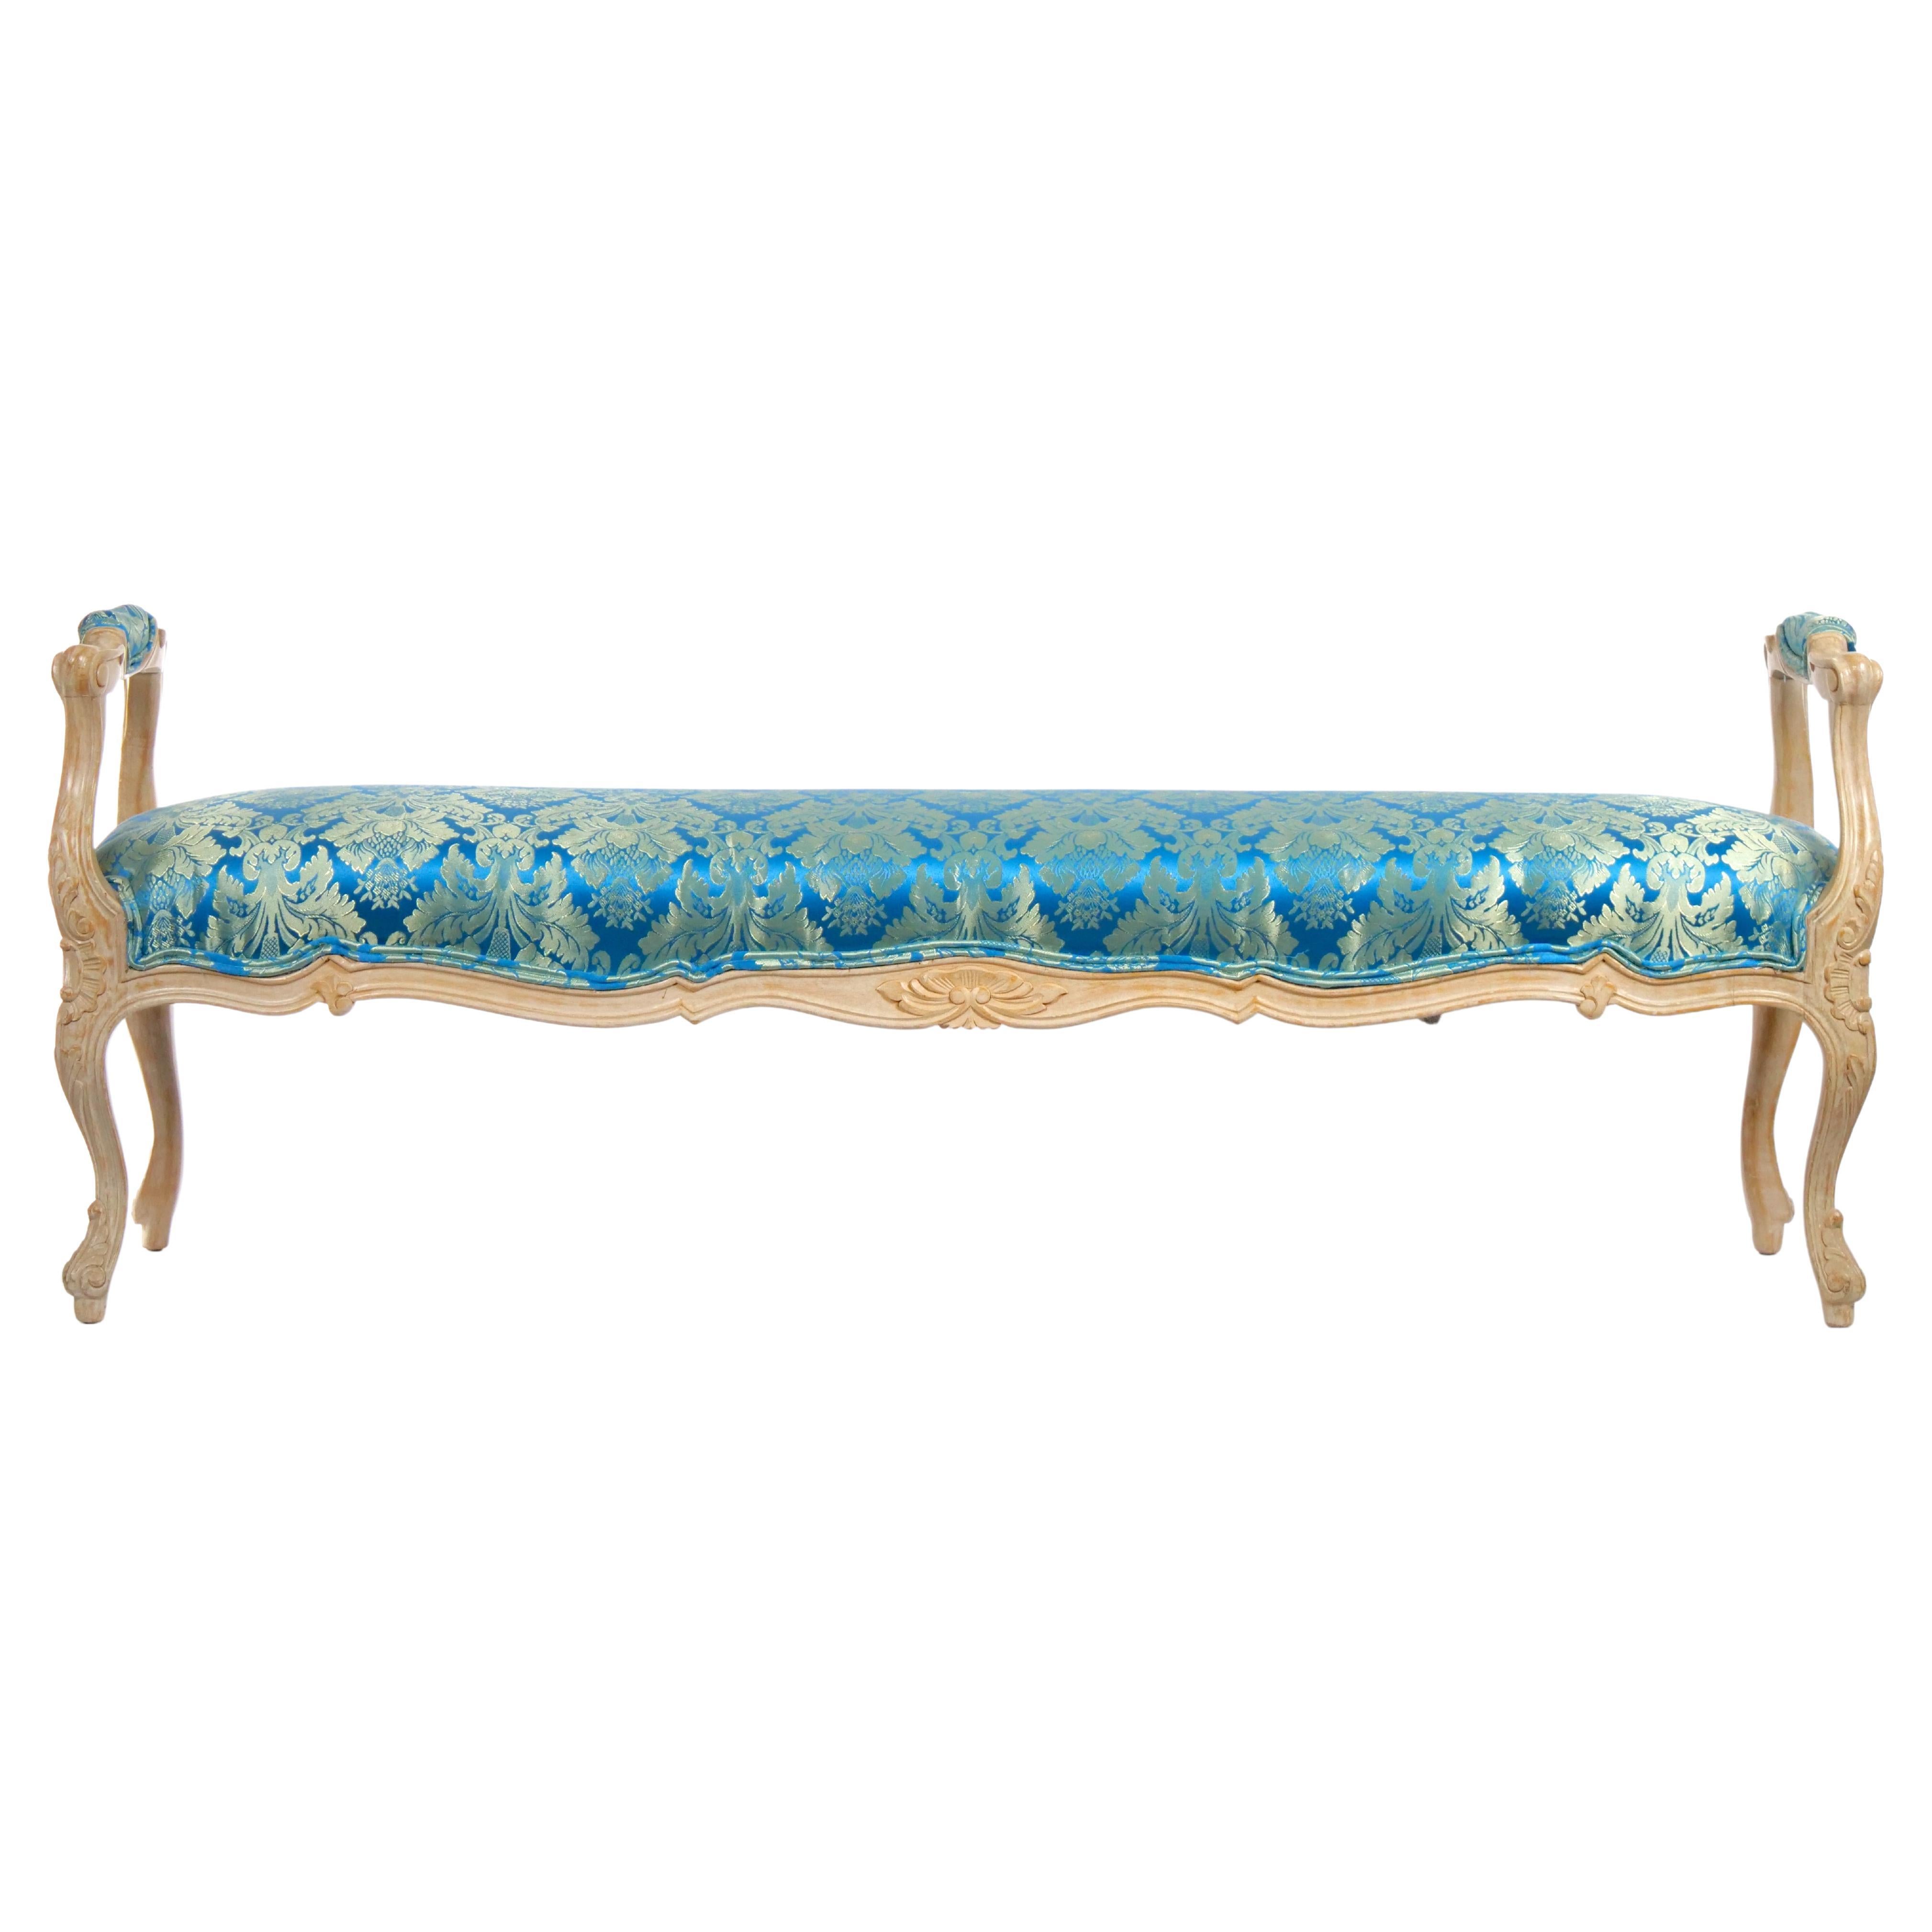 Painted Wood Window Bench / Arms & Flute Carved Accents  / Upholstered Seat For Sale